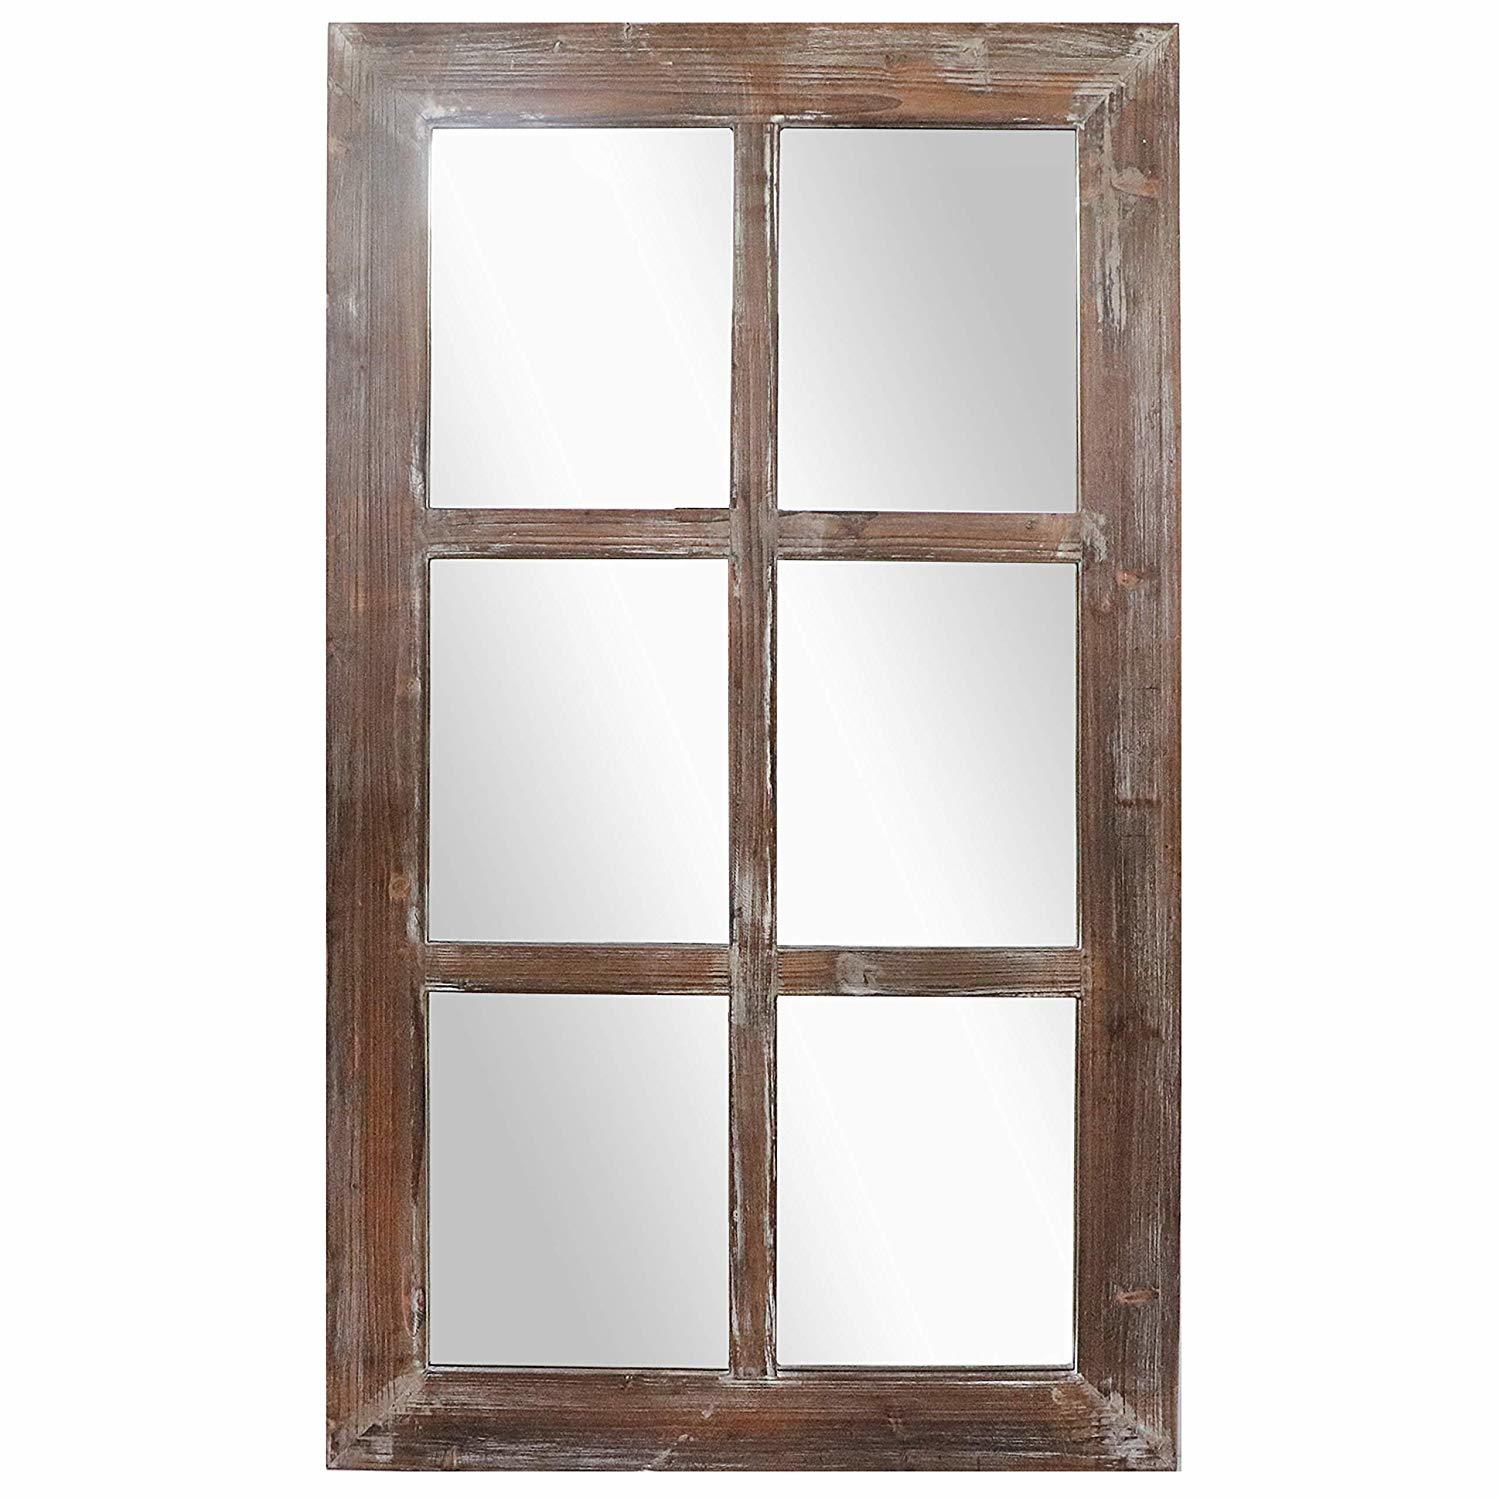 Old wood framed mirror, rectangular, window look style,    vintage style ALY0788